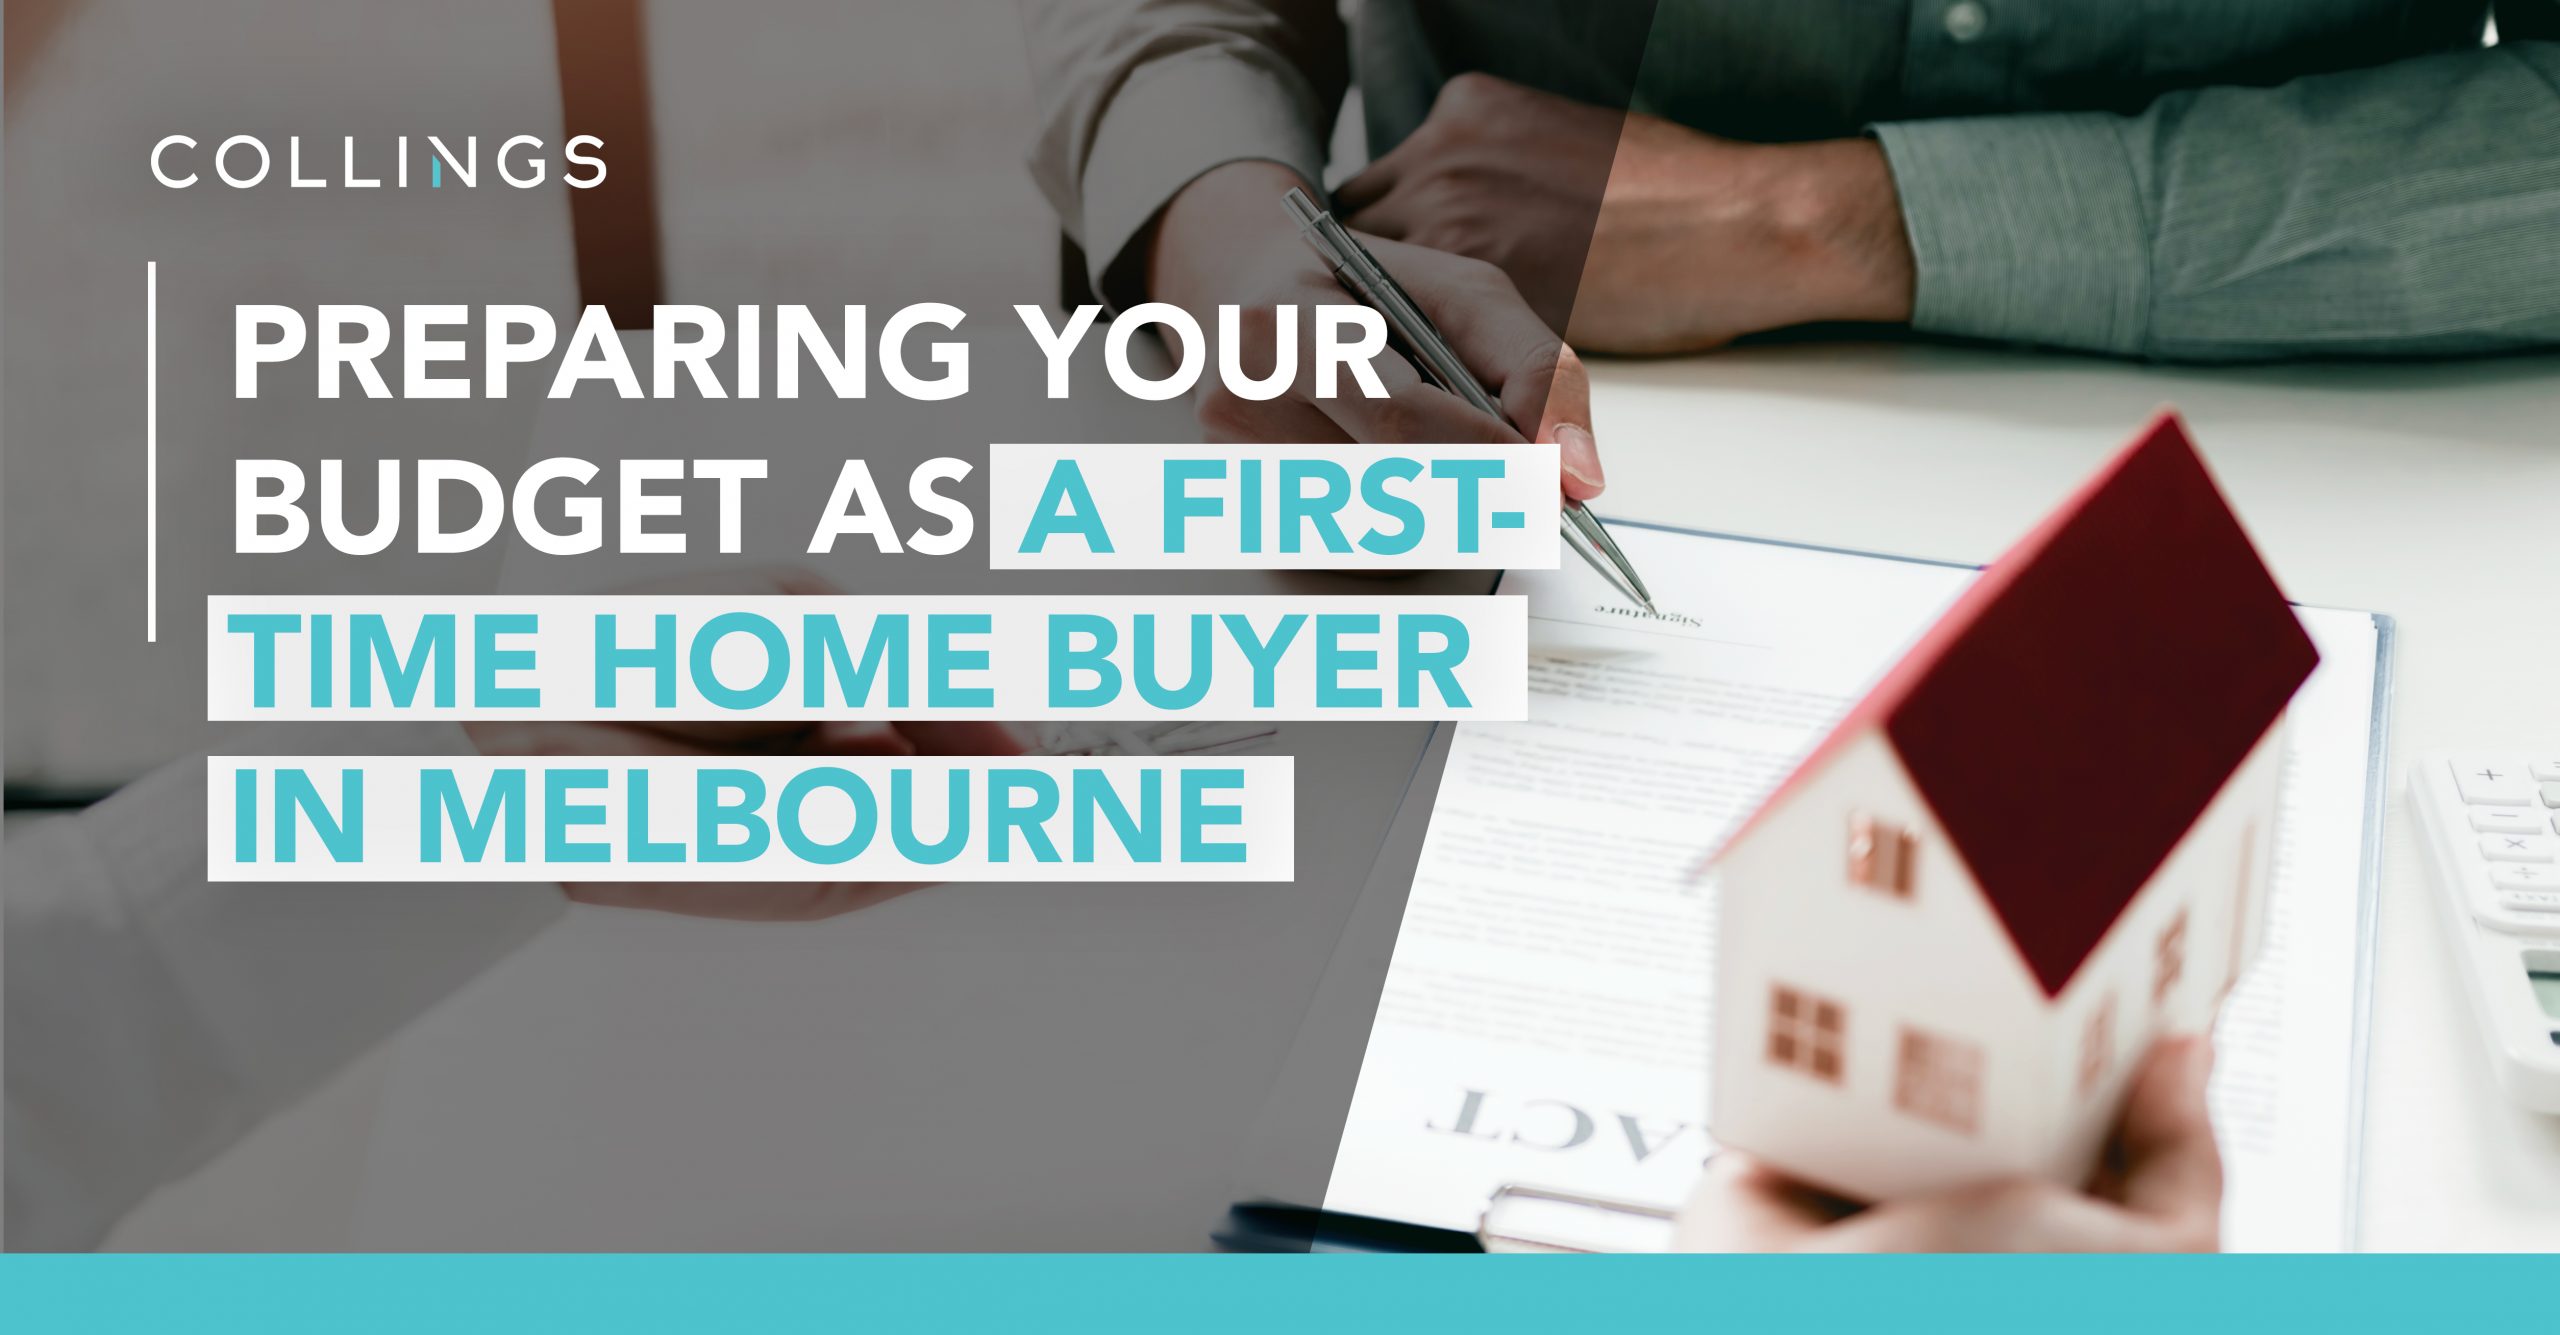 Preparing your budget as a first time home buyer in Melbourne